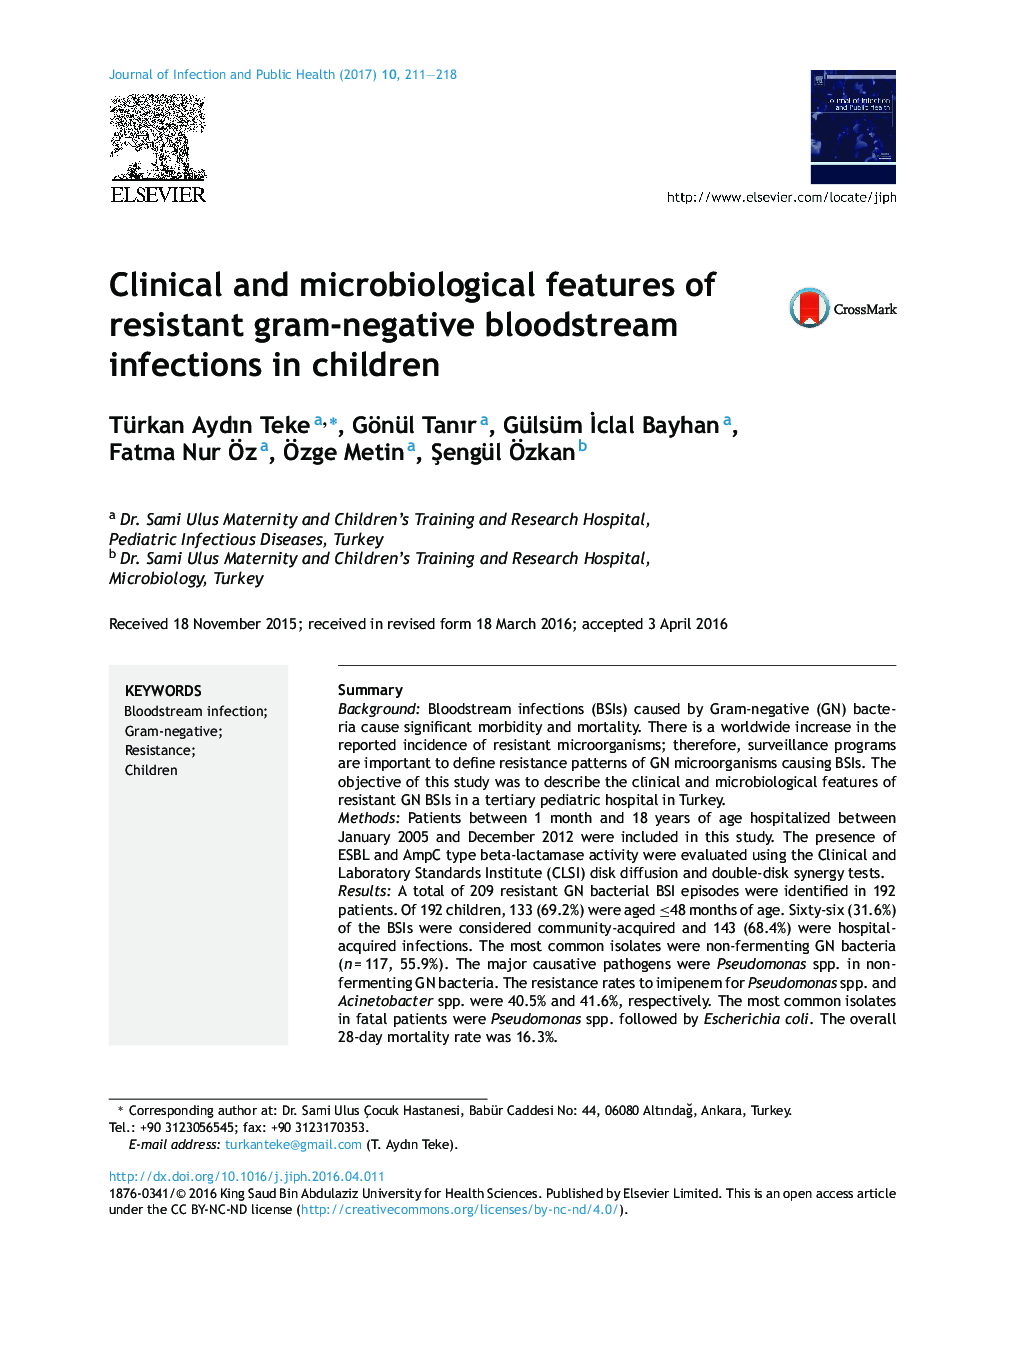 Clinical and microbiological features of resistant gram-negative bloodstream infections in children